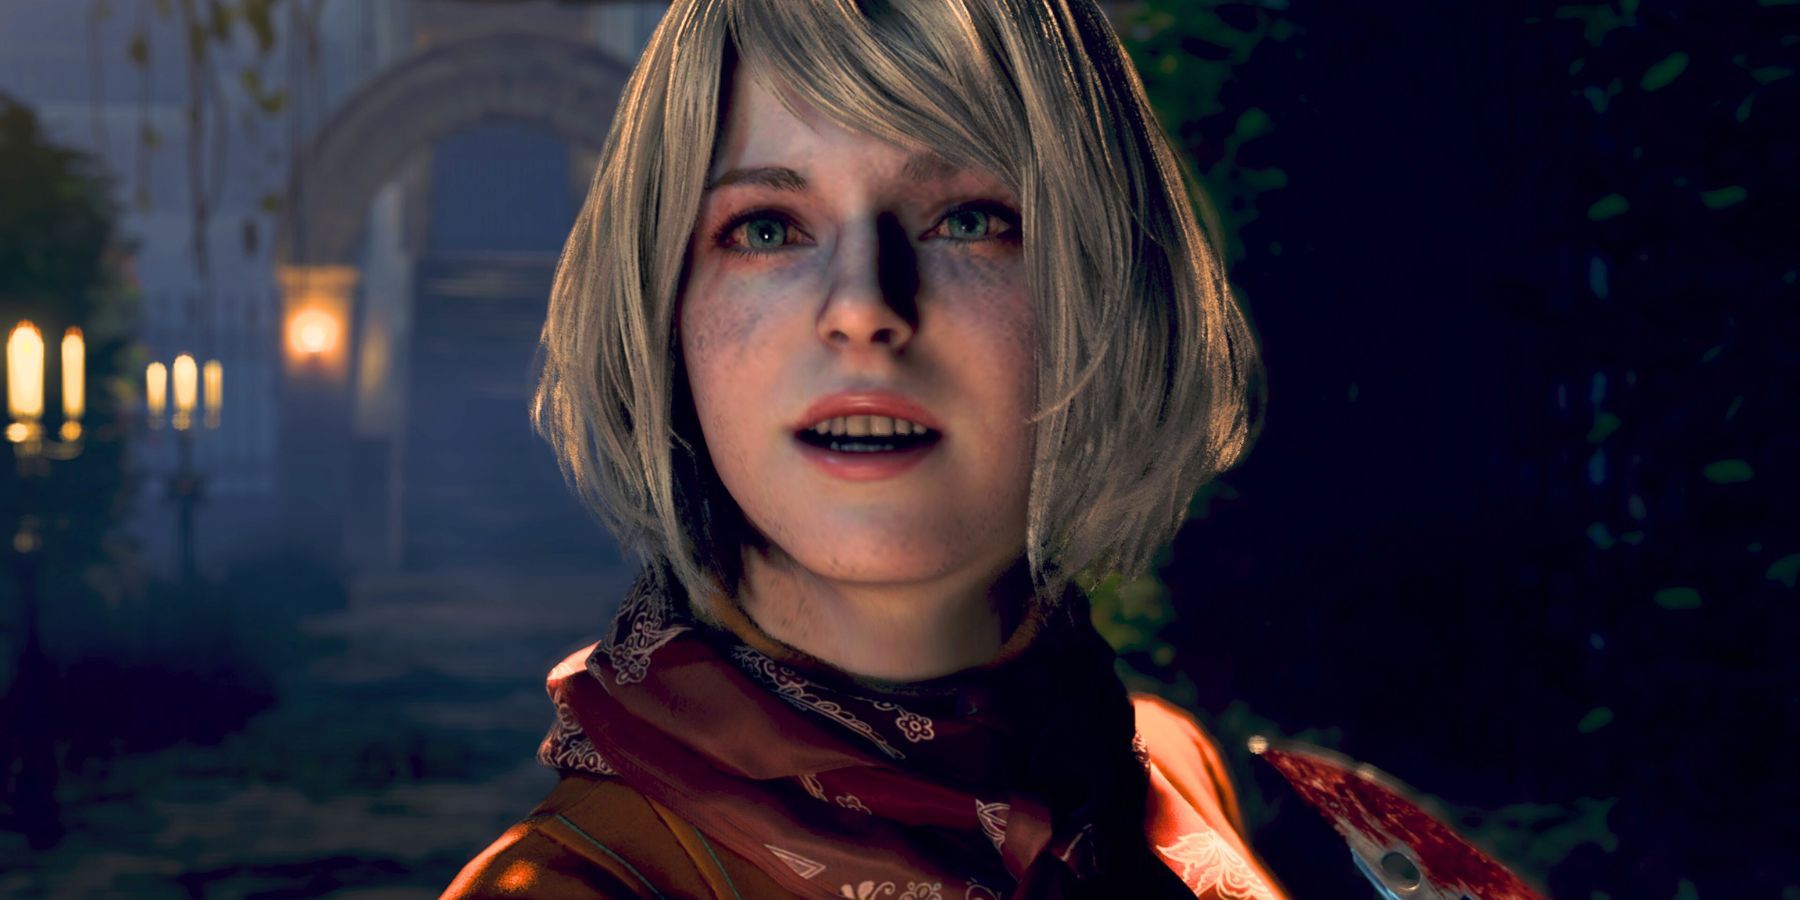 What's your opinion of new Ashley..? : r/residentevil